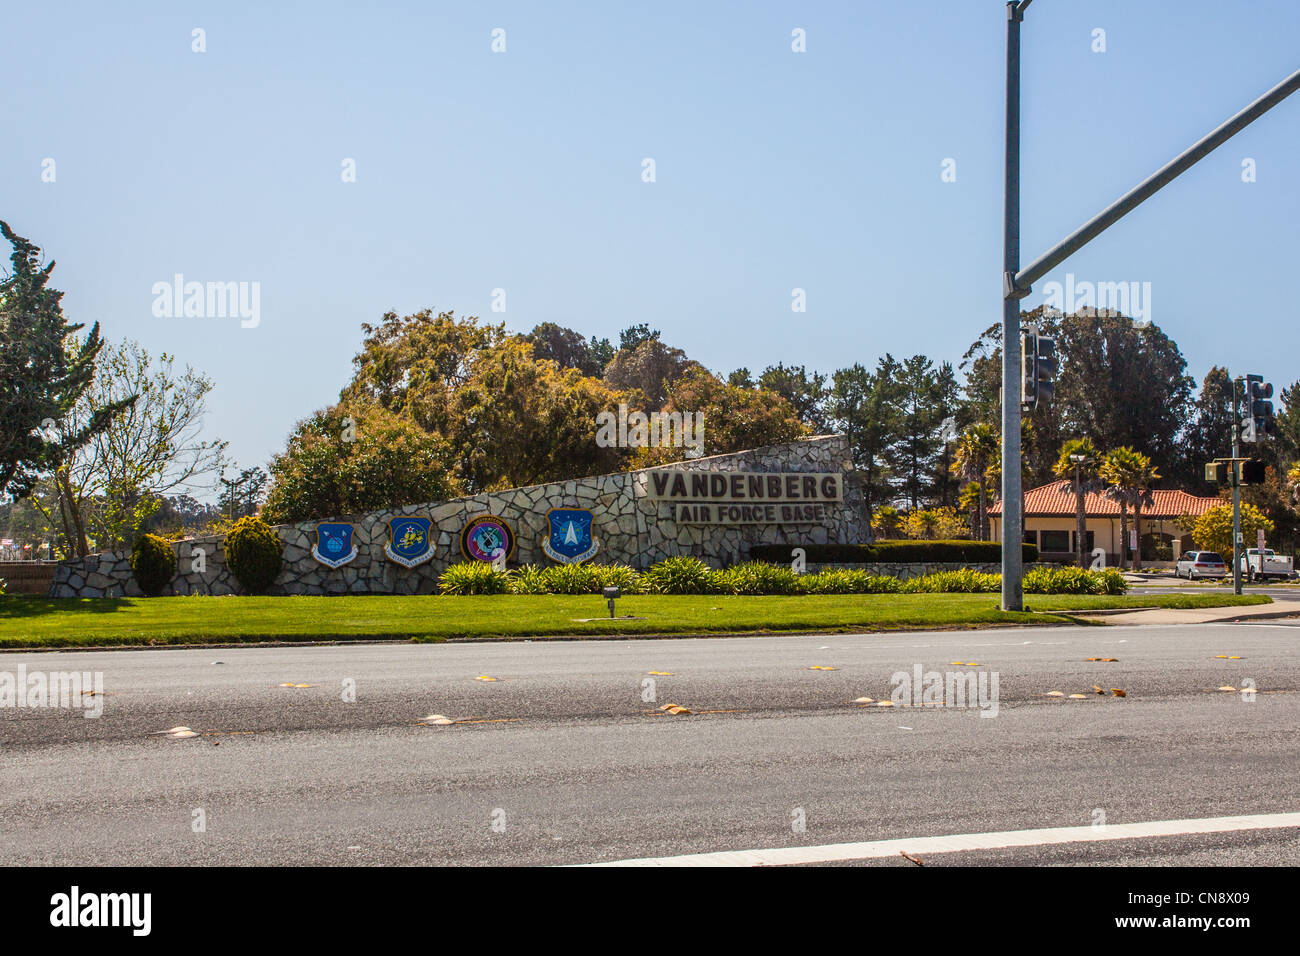 The entrance to Vandenberg Air Force base in Lompoc California 30th Stock Photo ...1300 x 956